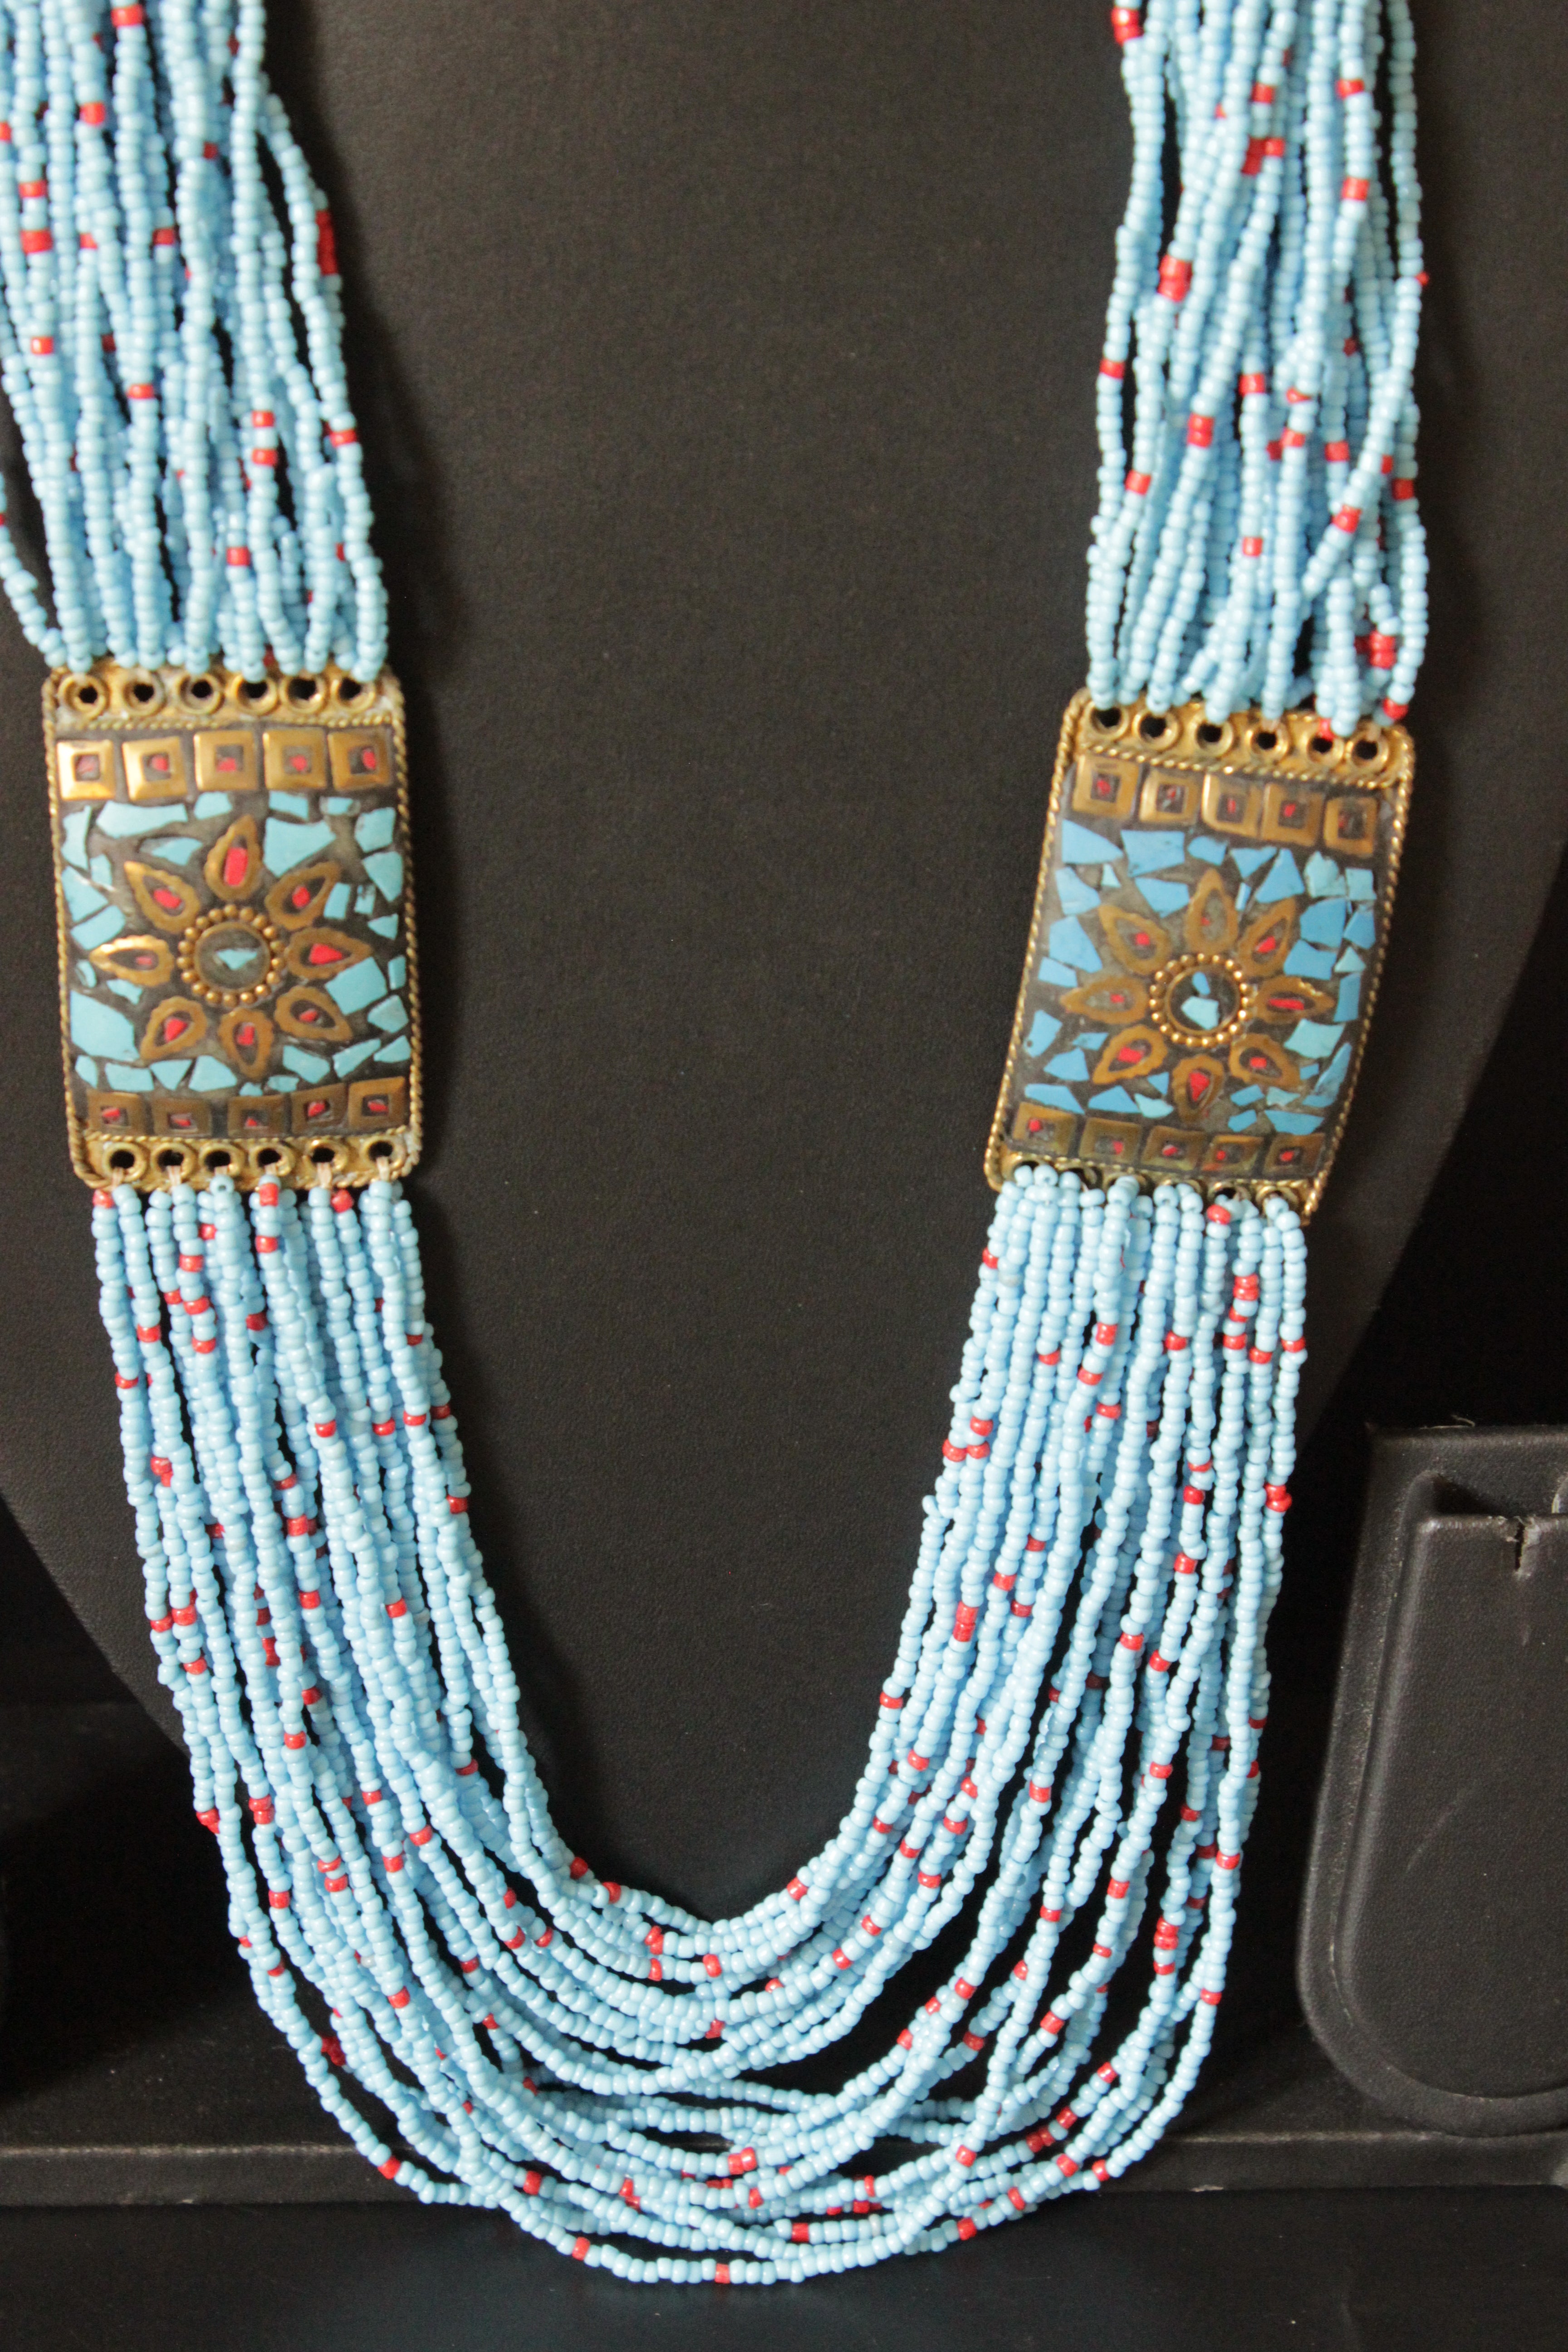 Sky Blue Beads Intertwined with Red Multi-Layer Beaded Necklace